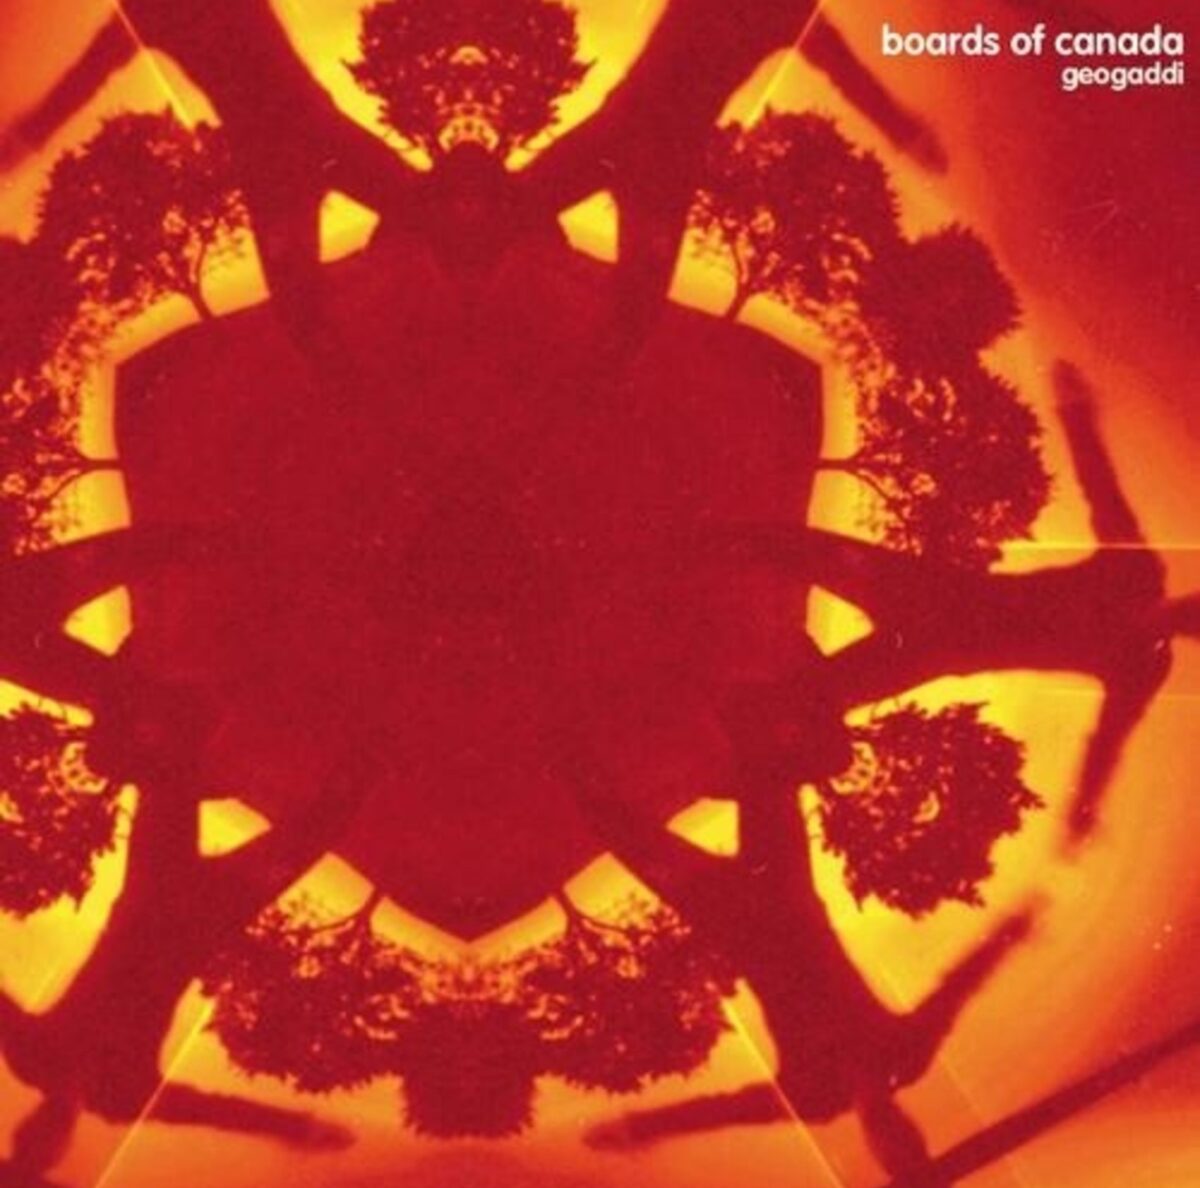 The album cover for "Geogaddi" by Boards of Canada. Features a kaleidoscopic red and orange image of a child jumping with trees in the background. It is refracted six times, so it appears hexagonal. The words "Boards of Canada, Geogaddi" appear in the top right corner